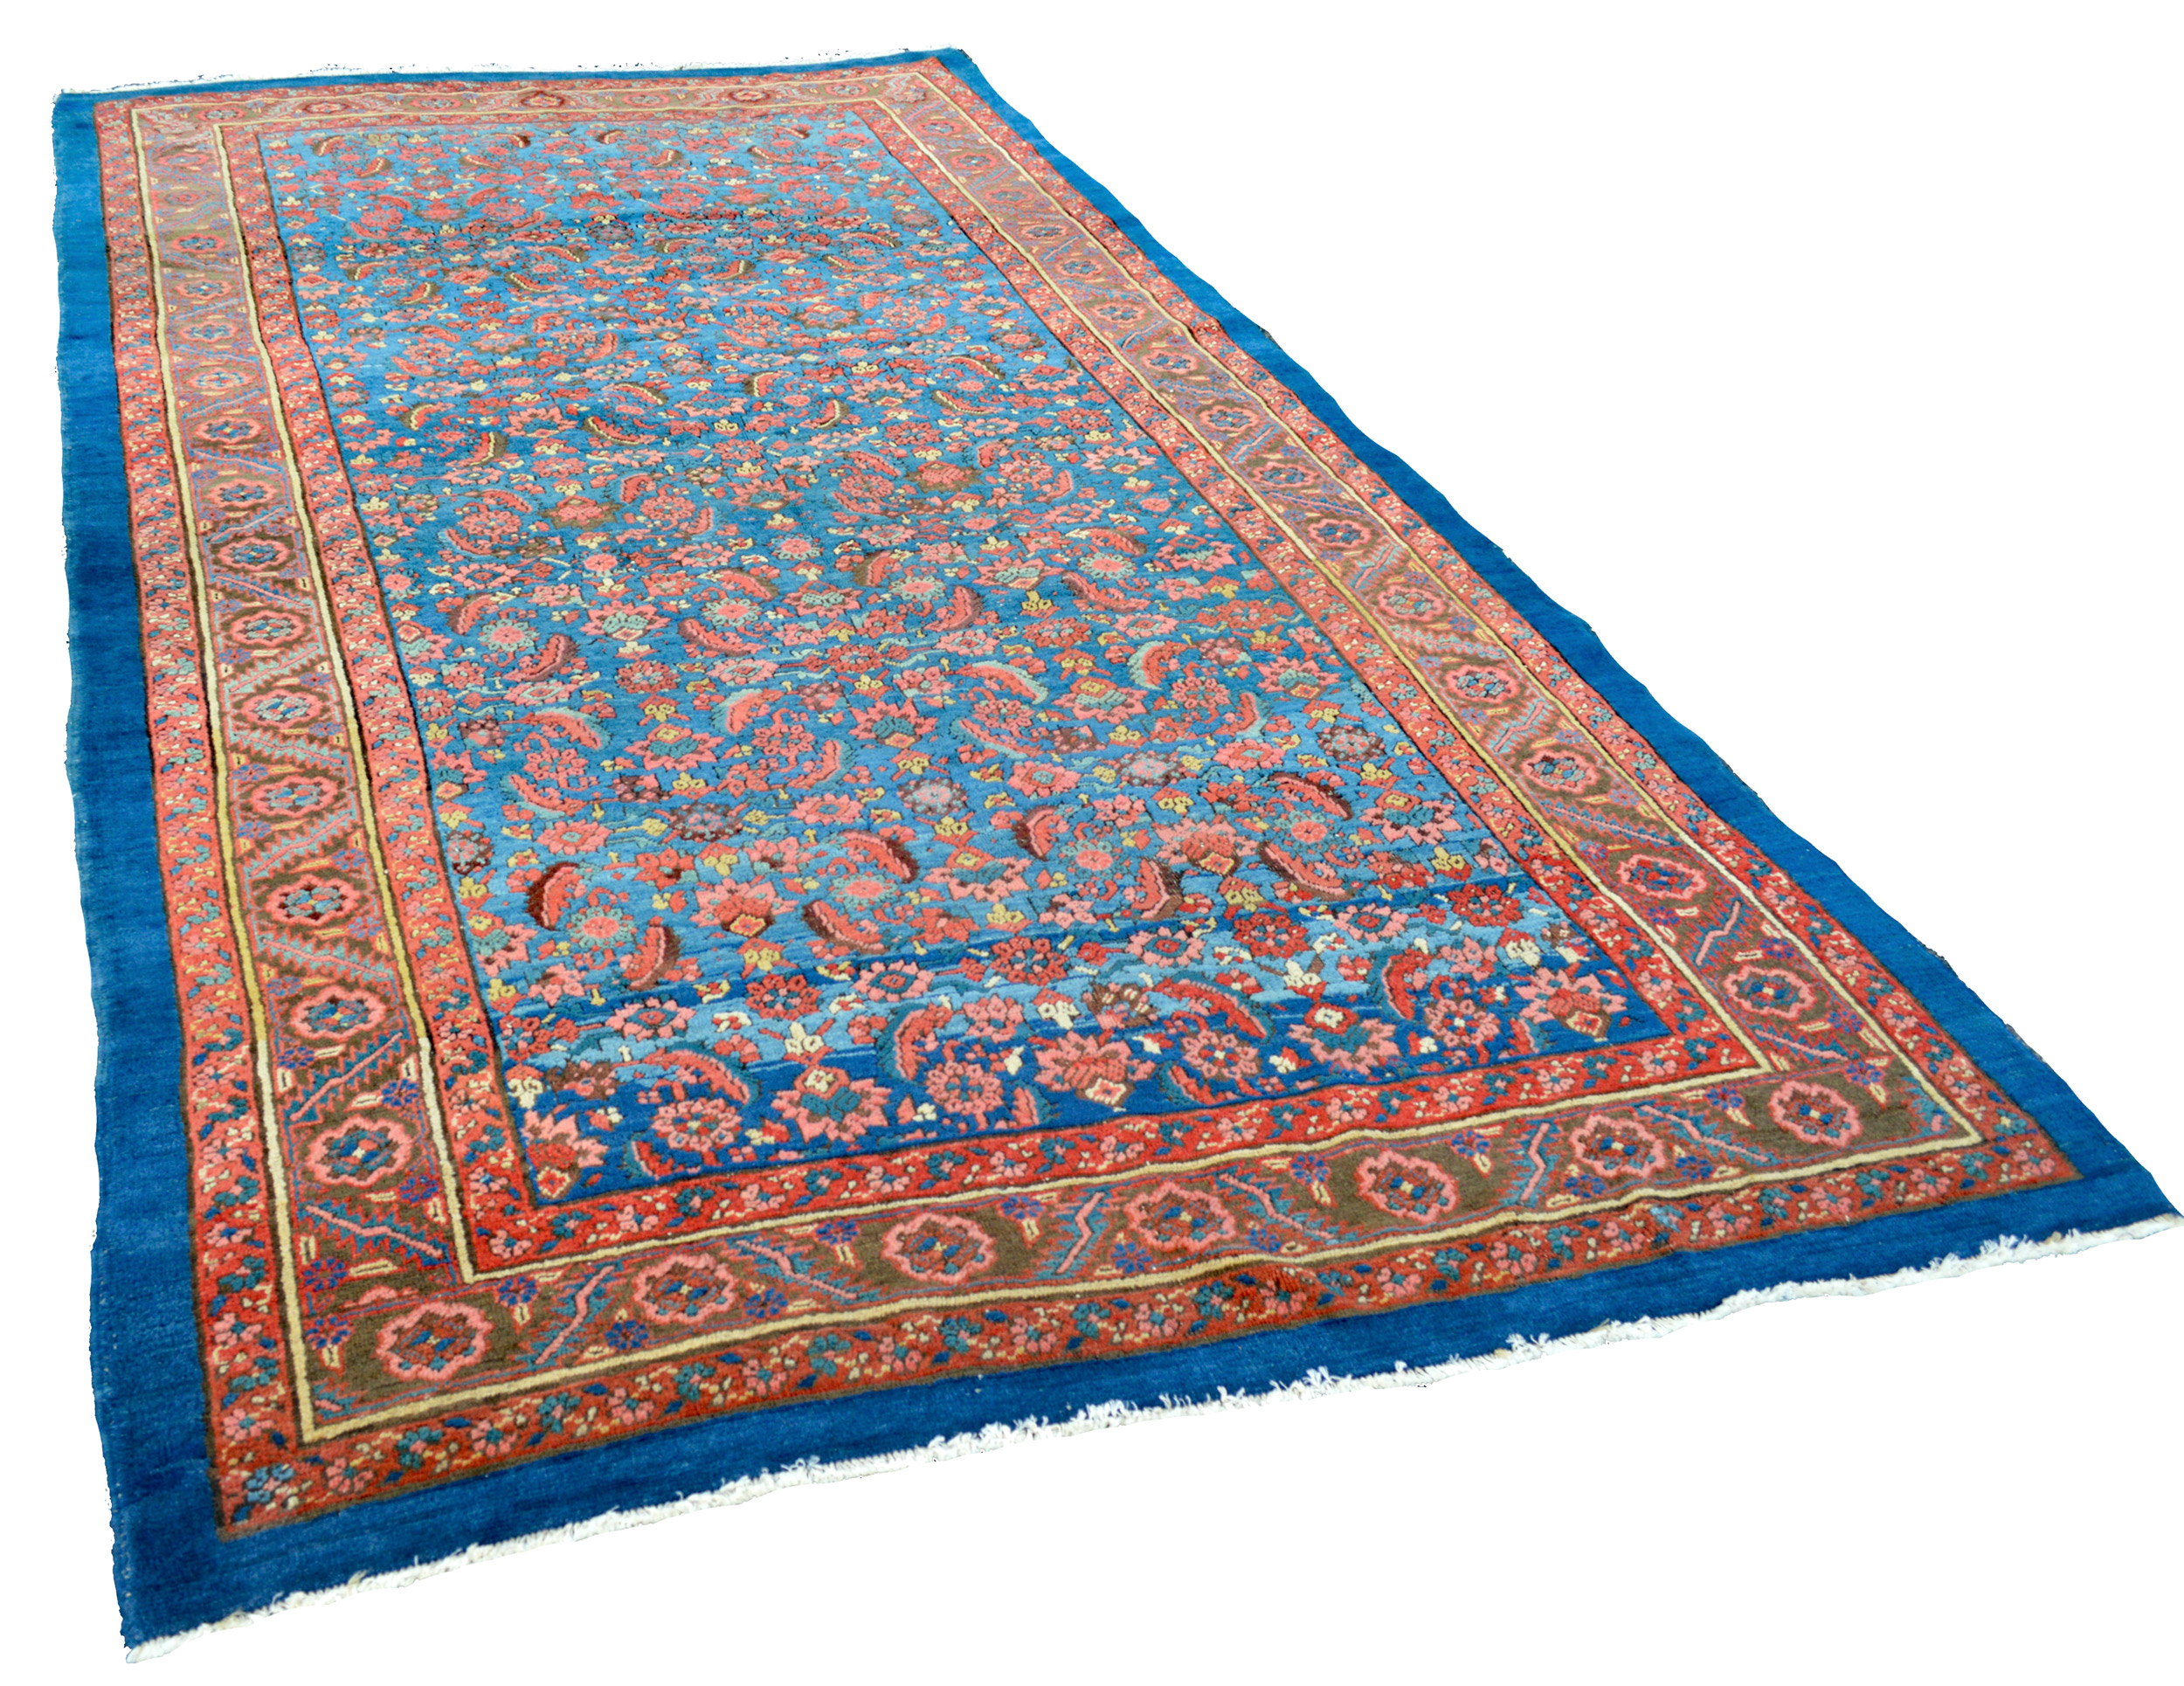 Antique Persian Bakshaish carpet with the classical Herati design on a denim blue field framed by a light brown border - Douglas Stock Gallery, antique rugs Boston,MA area, antique rugs New England